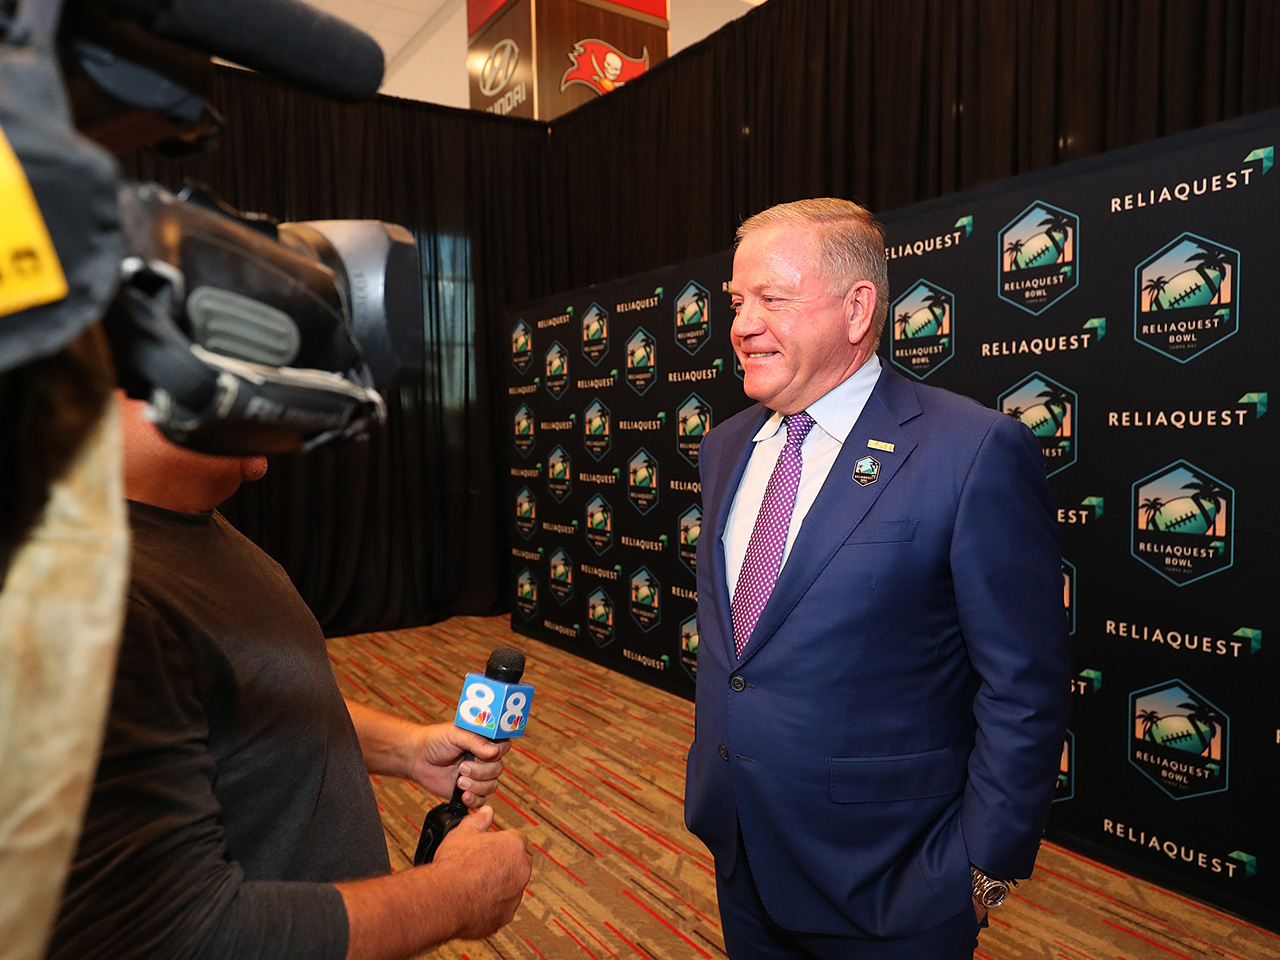 Coach Kelly at pre party media session